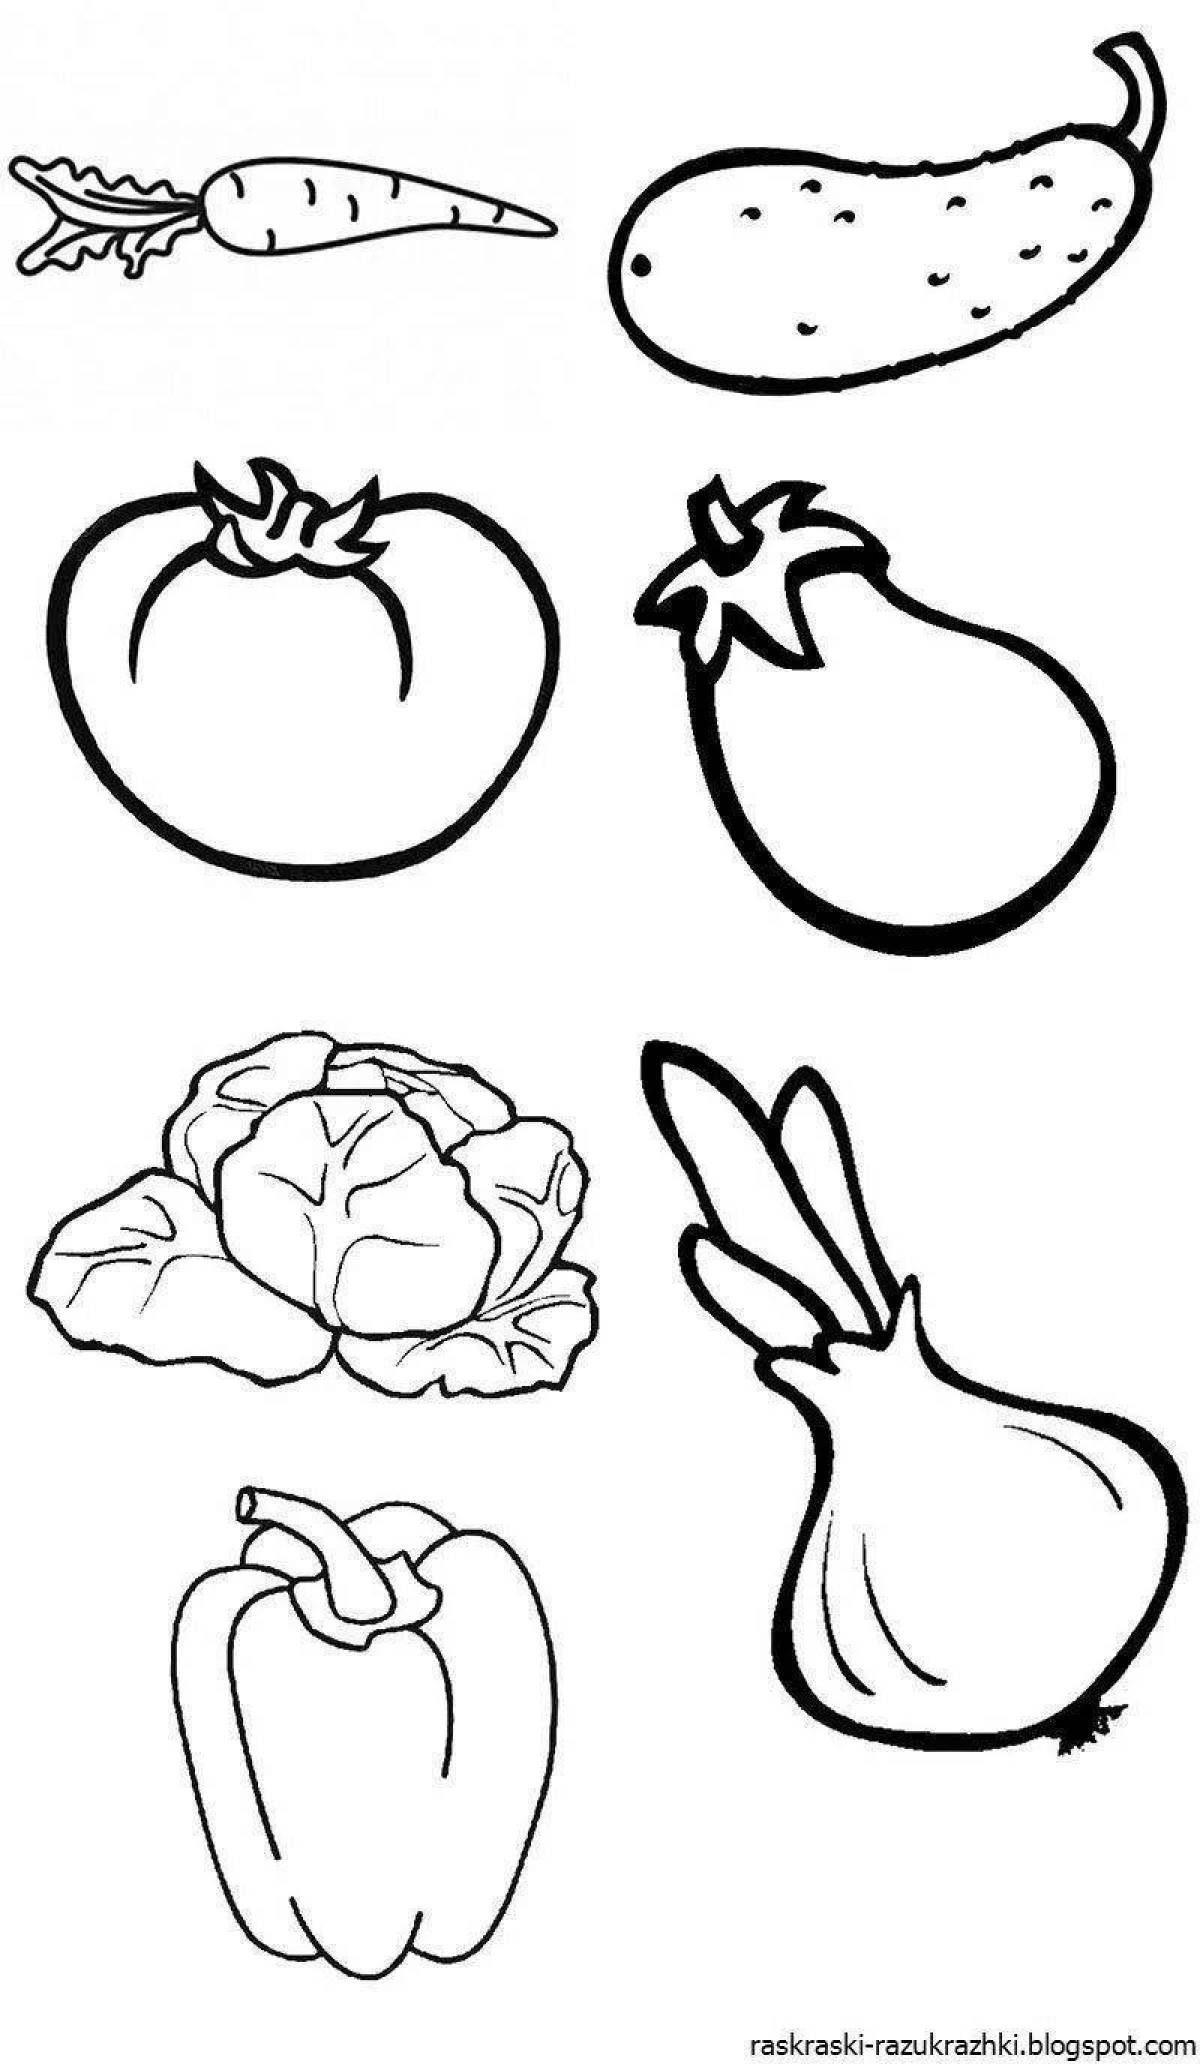 Fun coloring of vegetables for children 3 years old